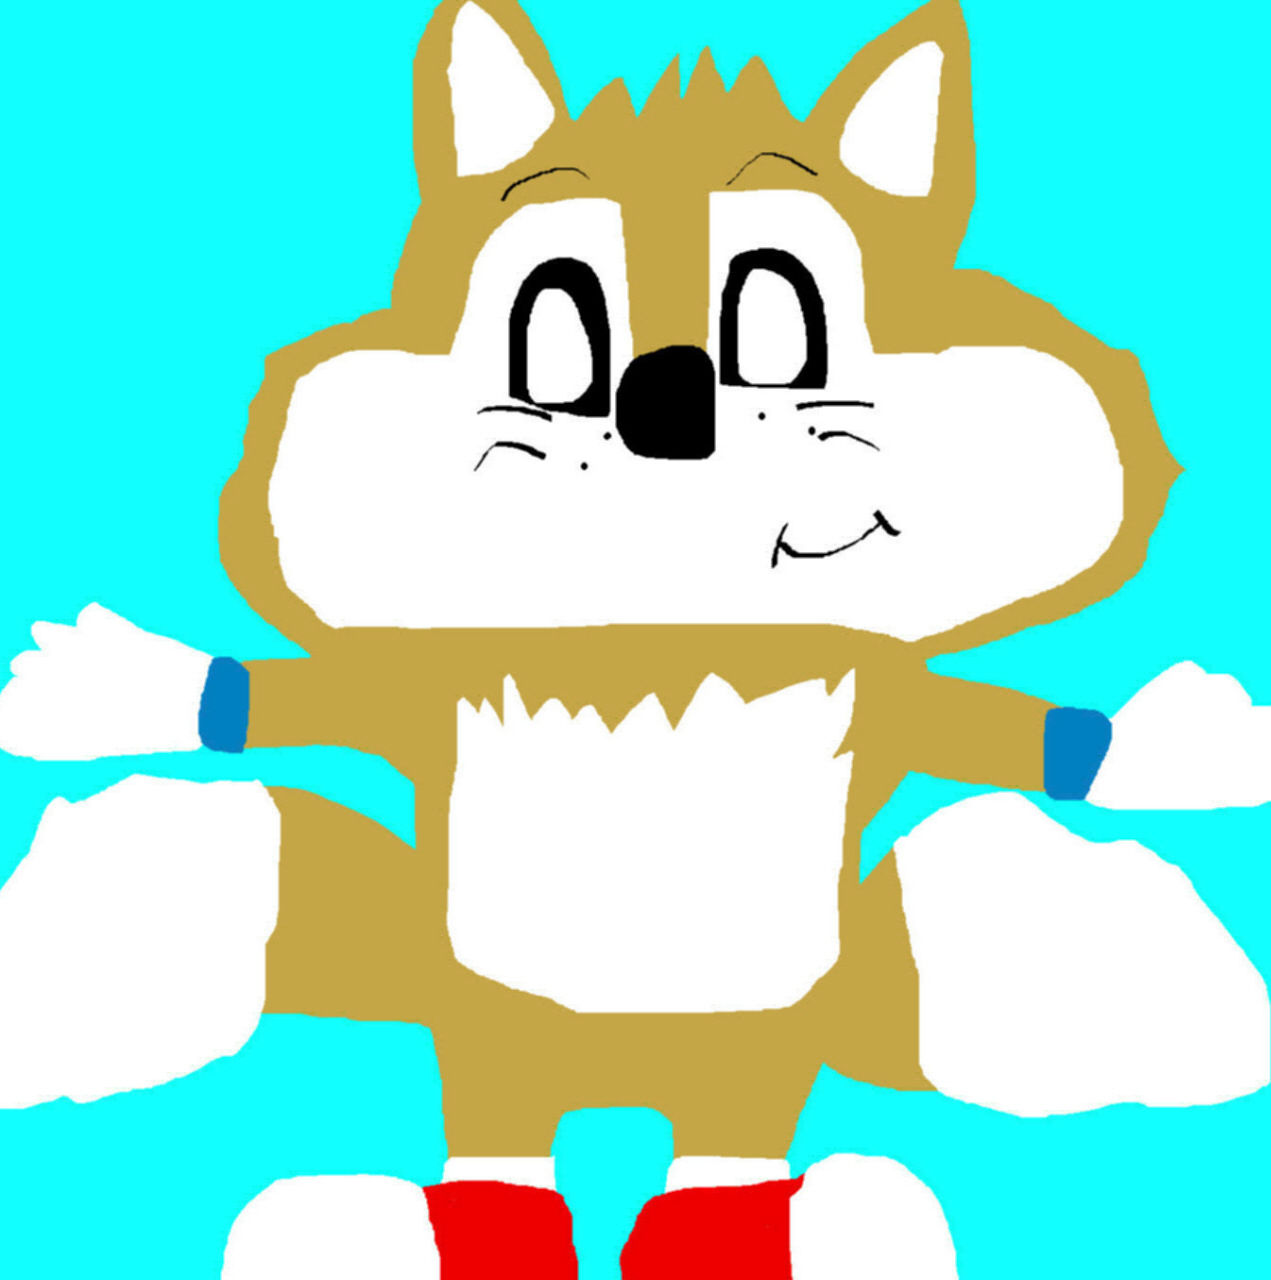 Tails With Whiskers Based On Caltoy Plush Again MS Paint^^ by Falconlobo